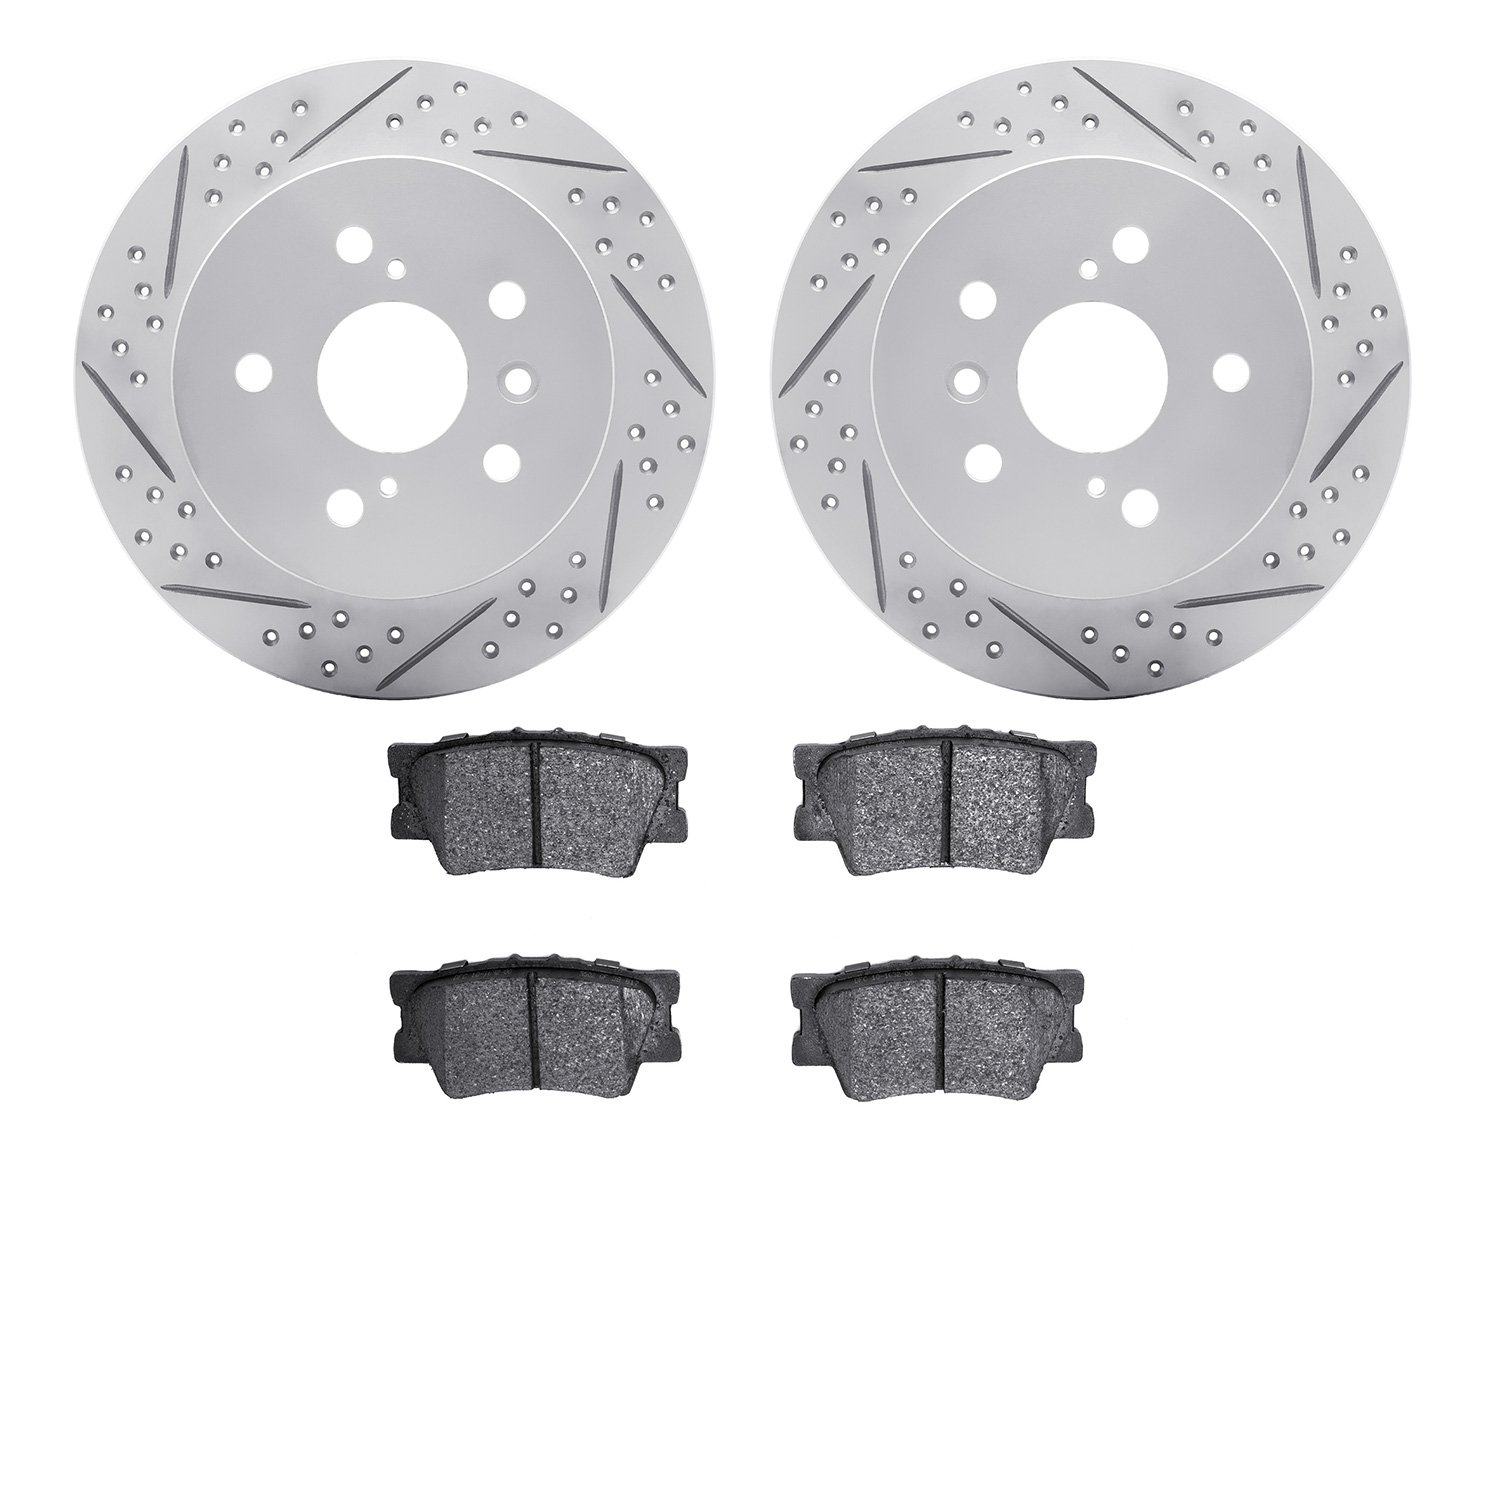 2502-76048 Geoperformance Drilled/Slotted Rotors w/5000 Advanced Brake Pads Kit, 2012-2018 Lexus/Toyota/Scion, Position: Rear